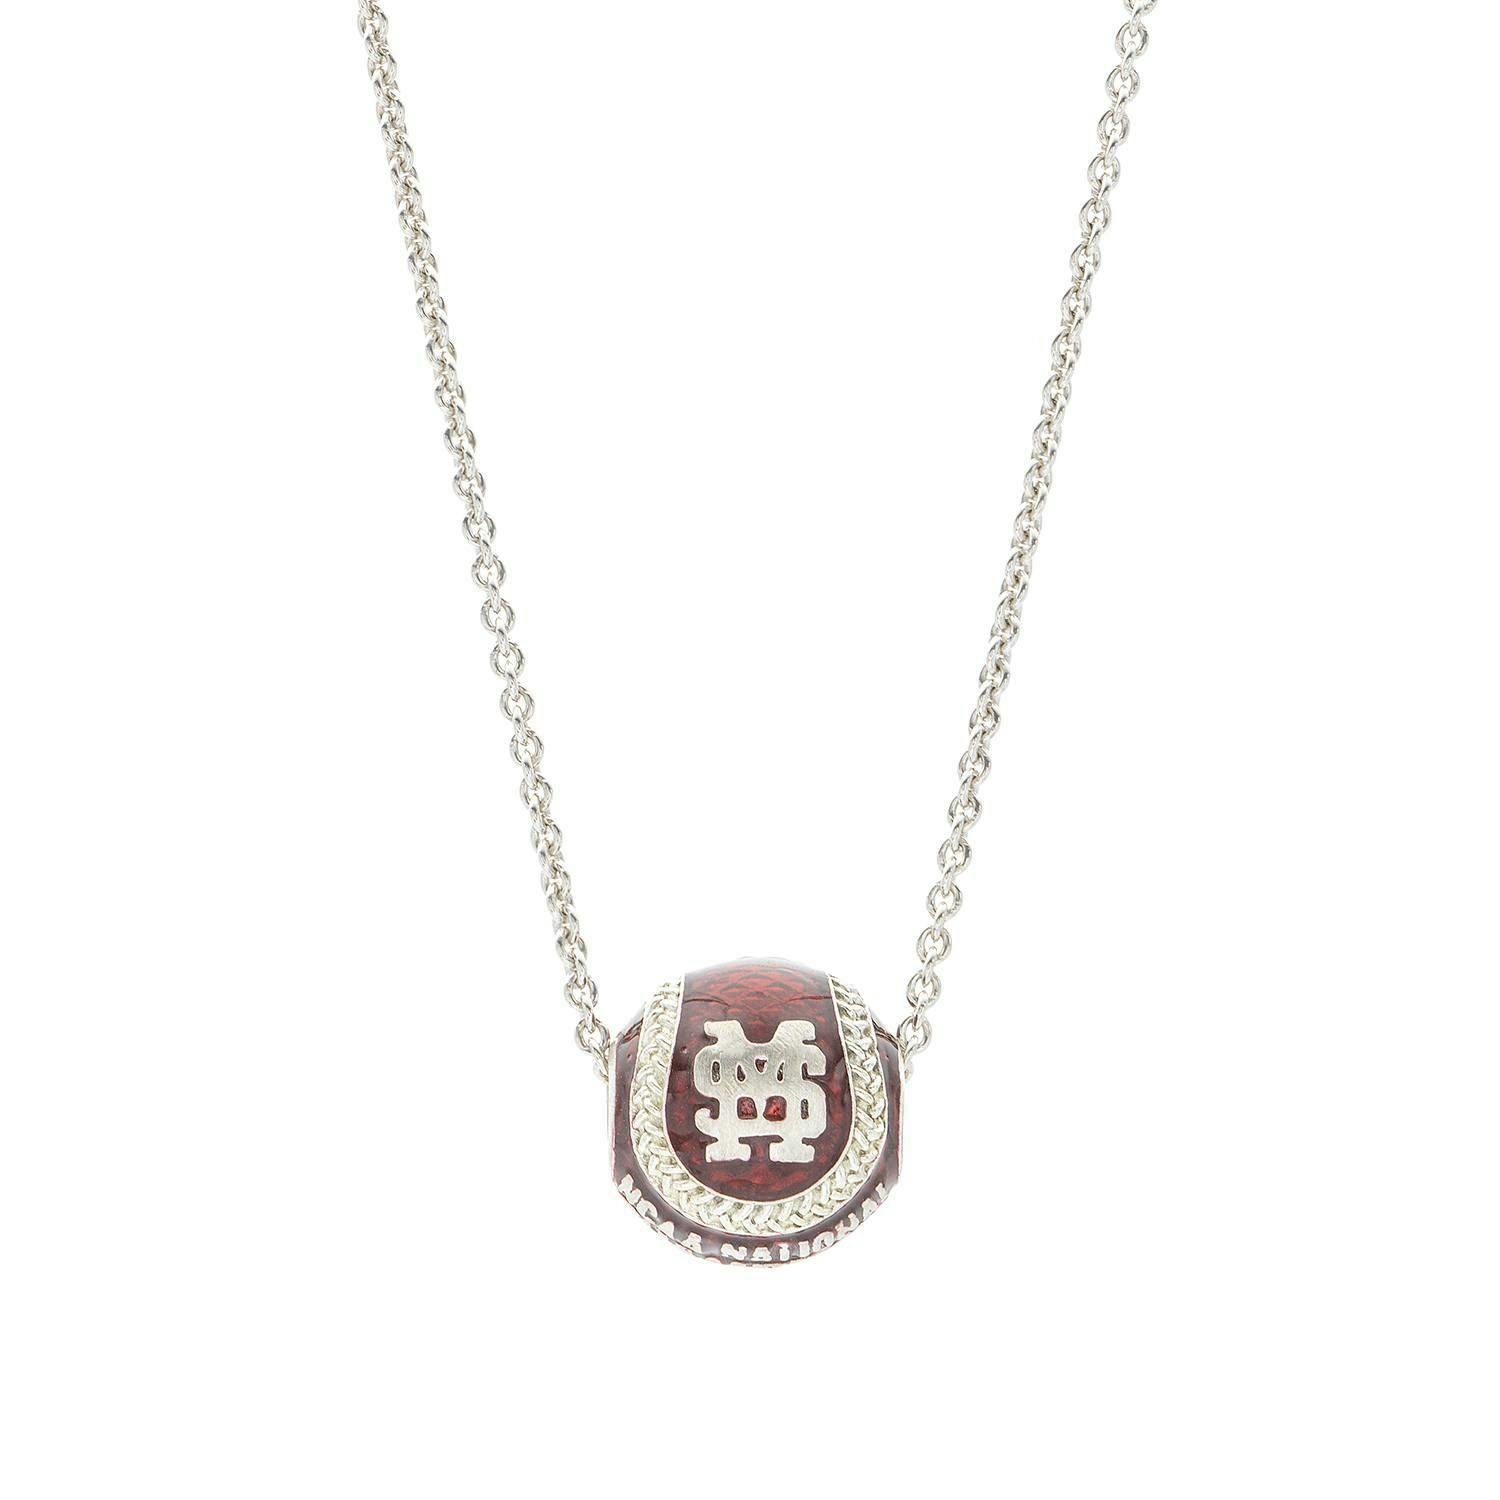 Mississippi State 2021 College World Series Commemorative Baseball Pendant Necklace 1